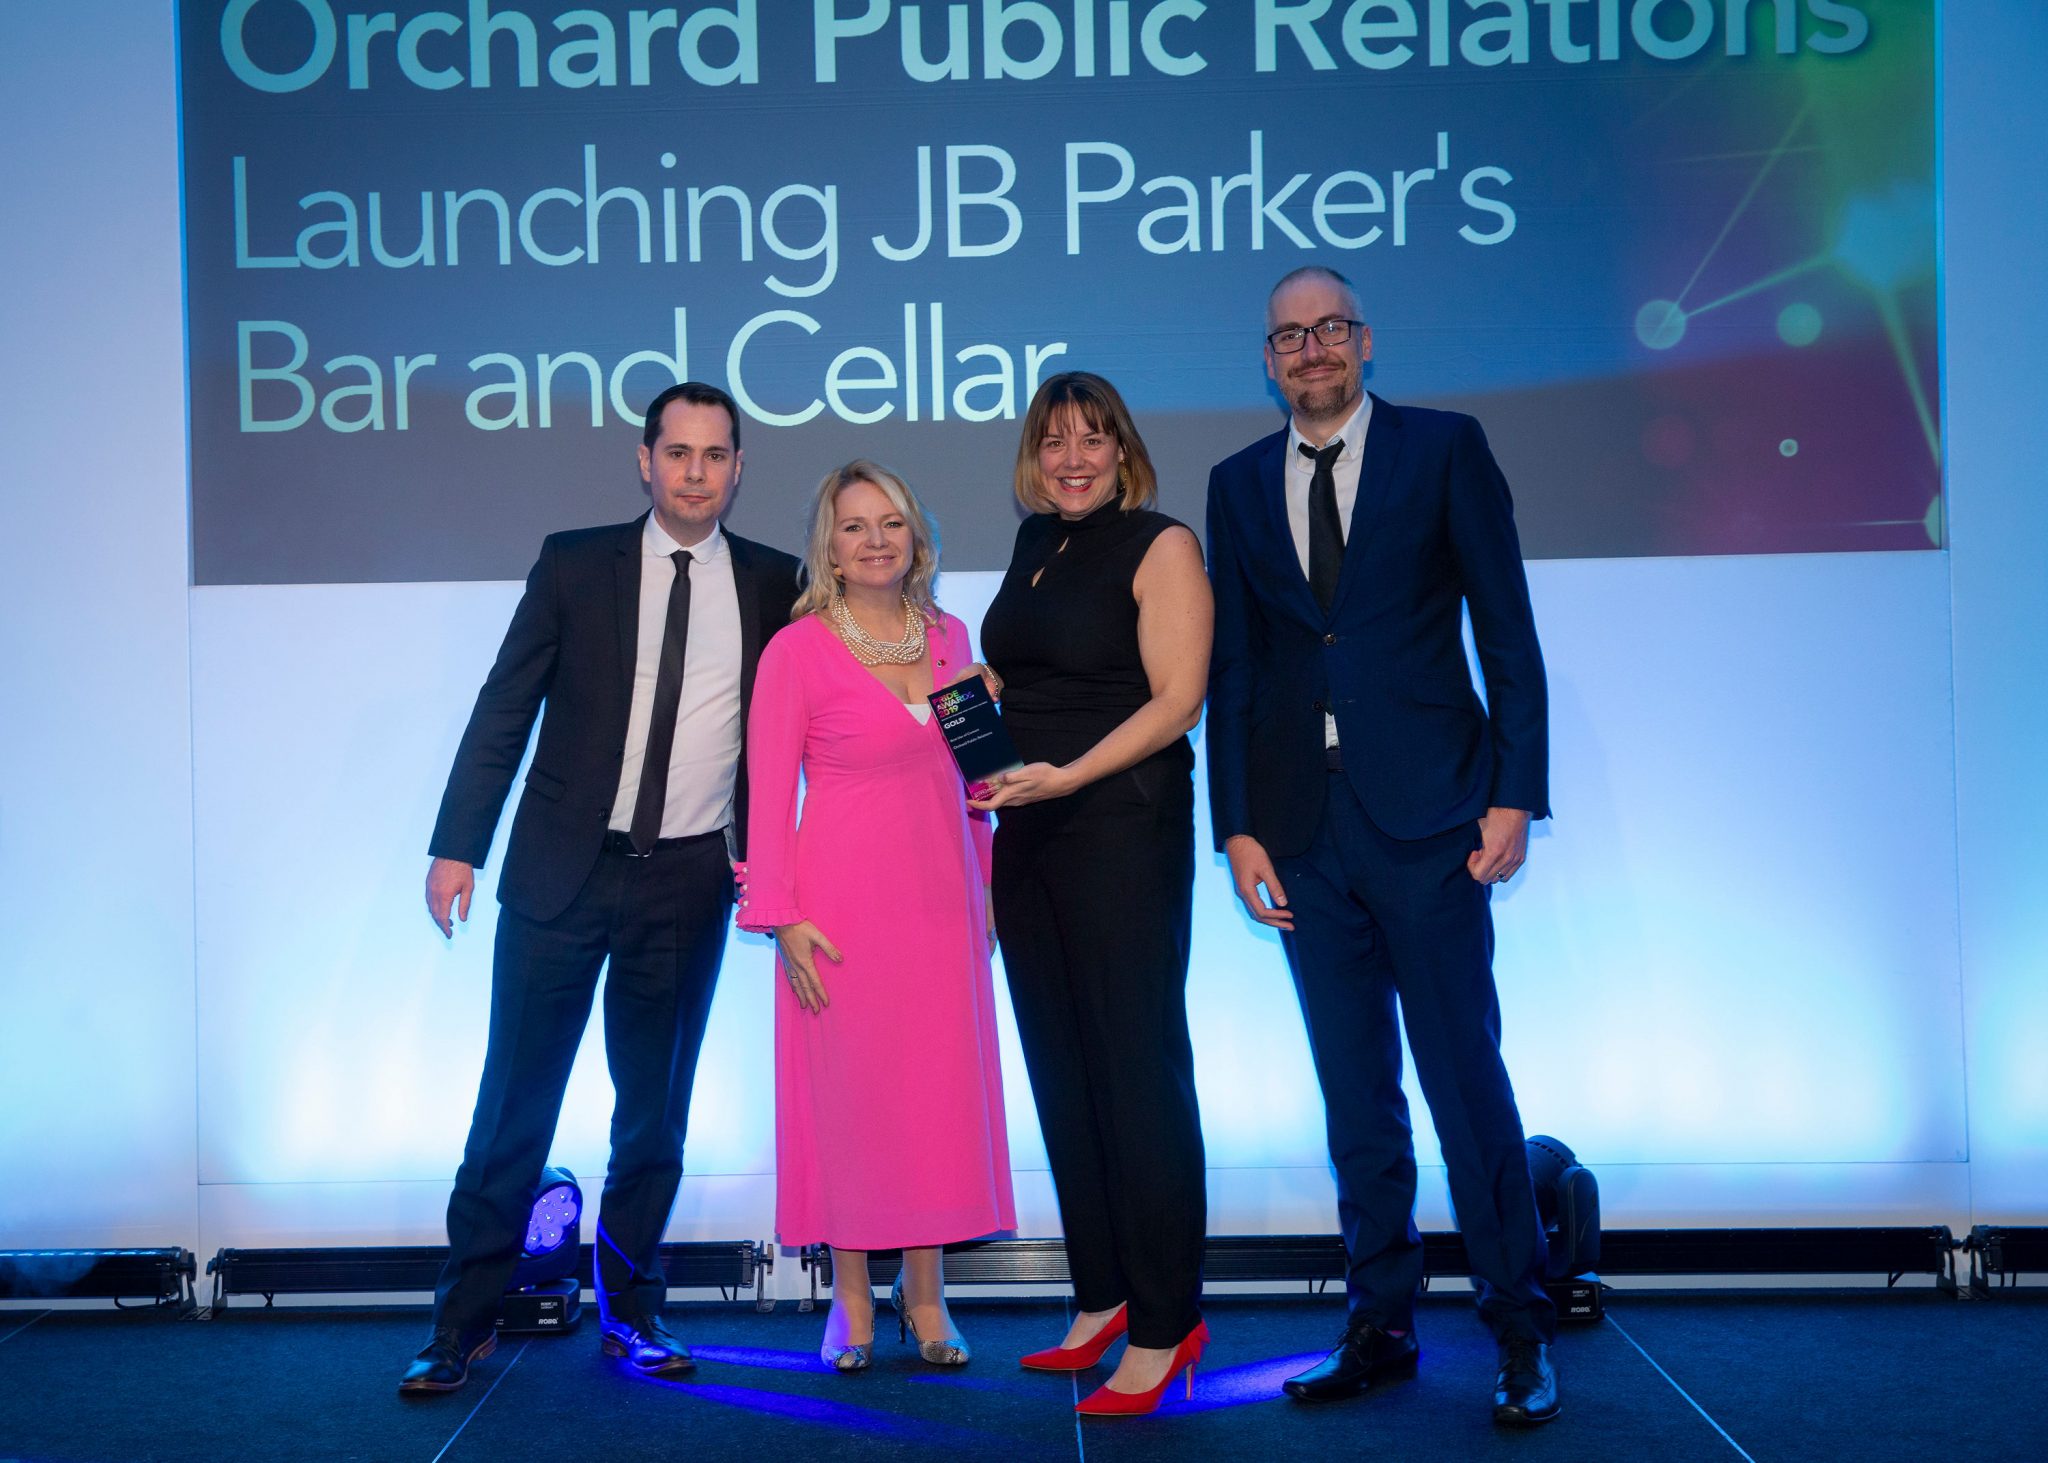 Gold stamp of approval for Orchard